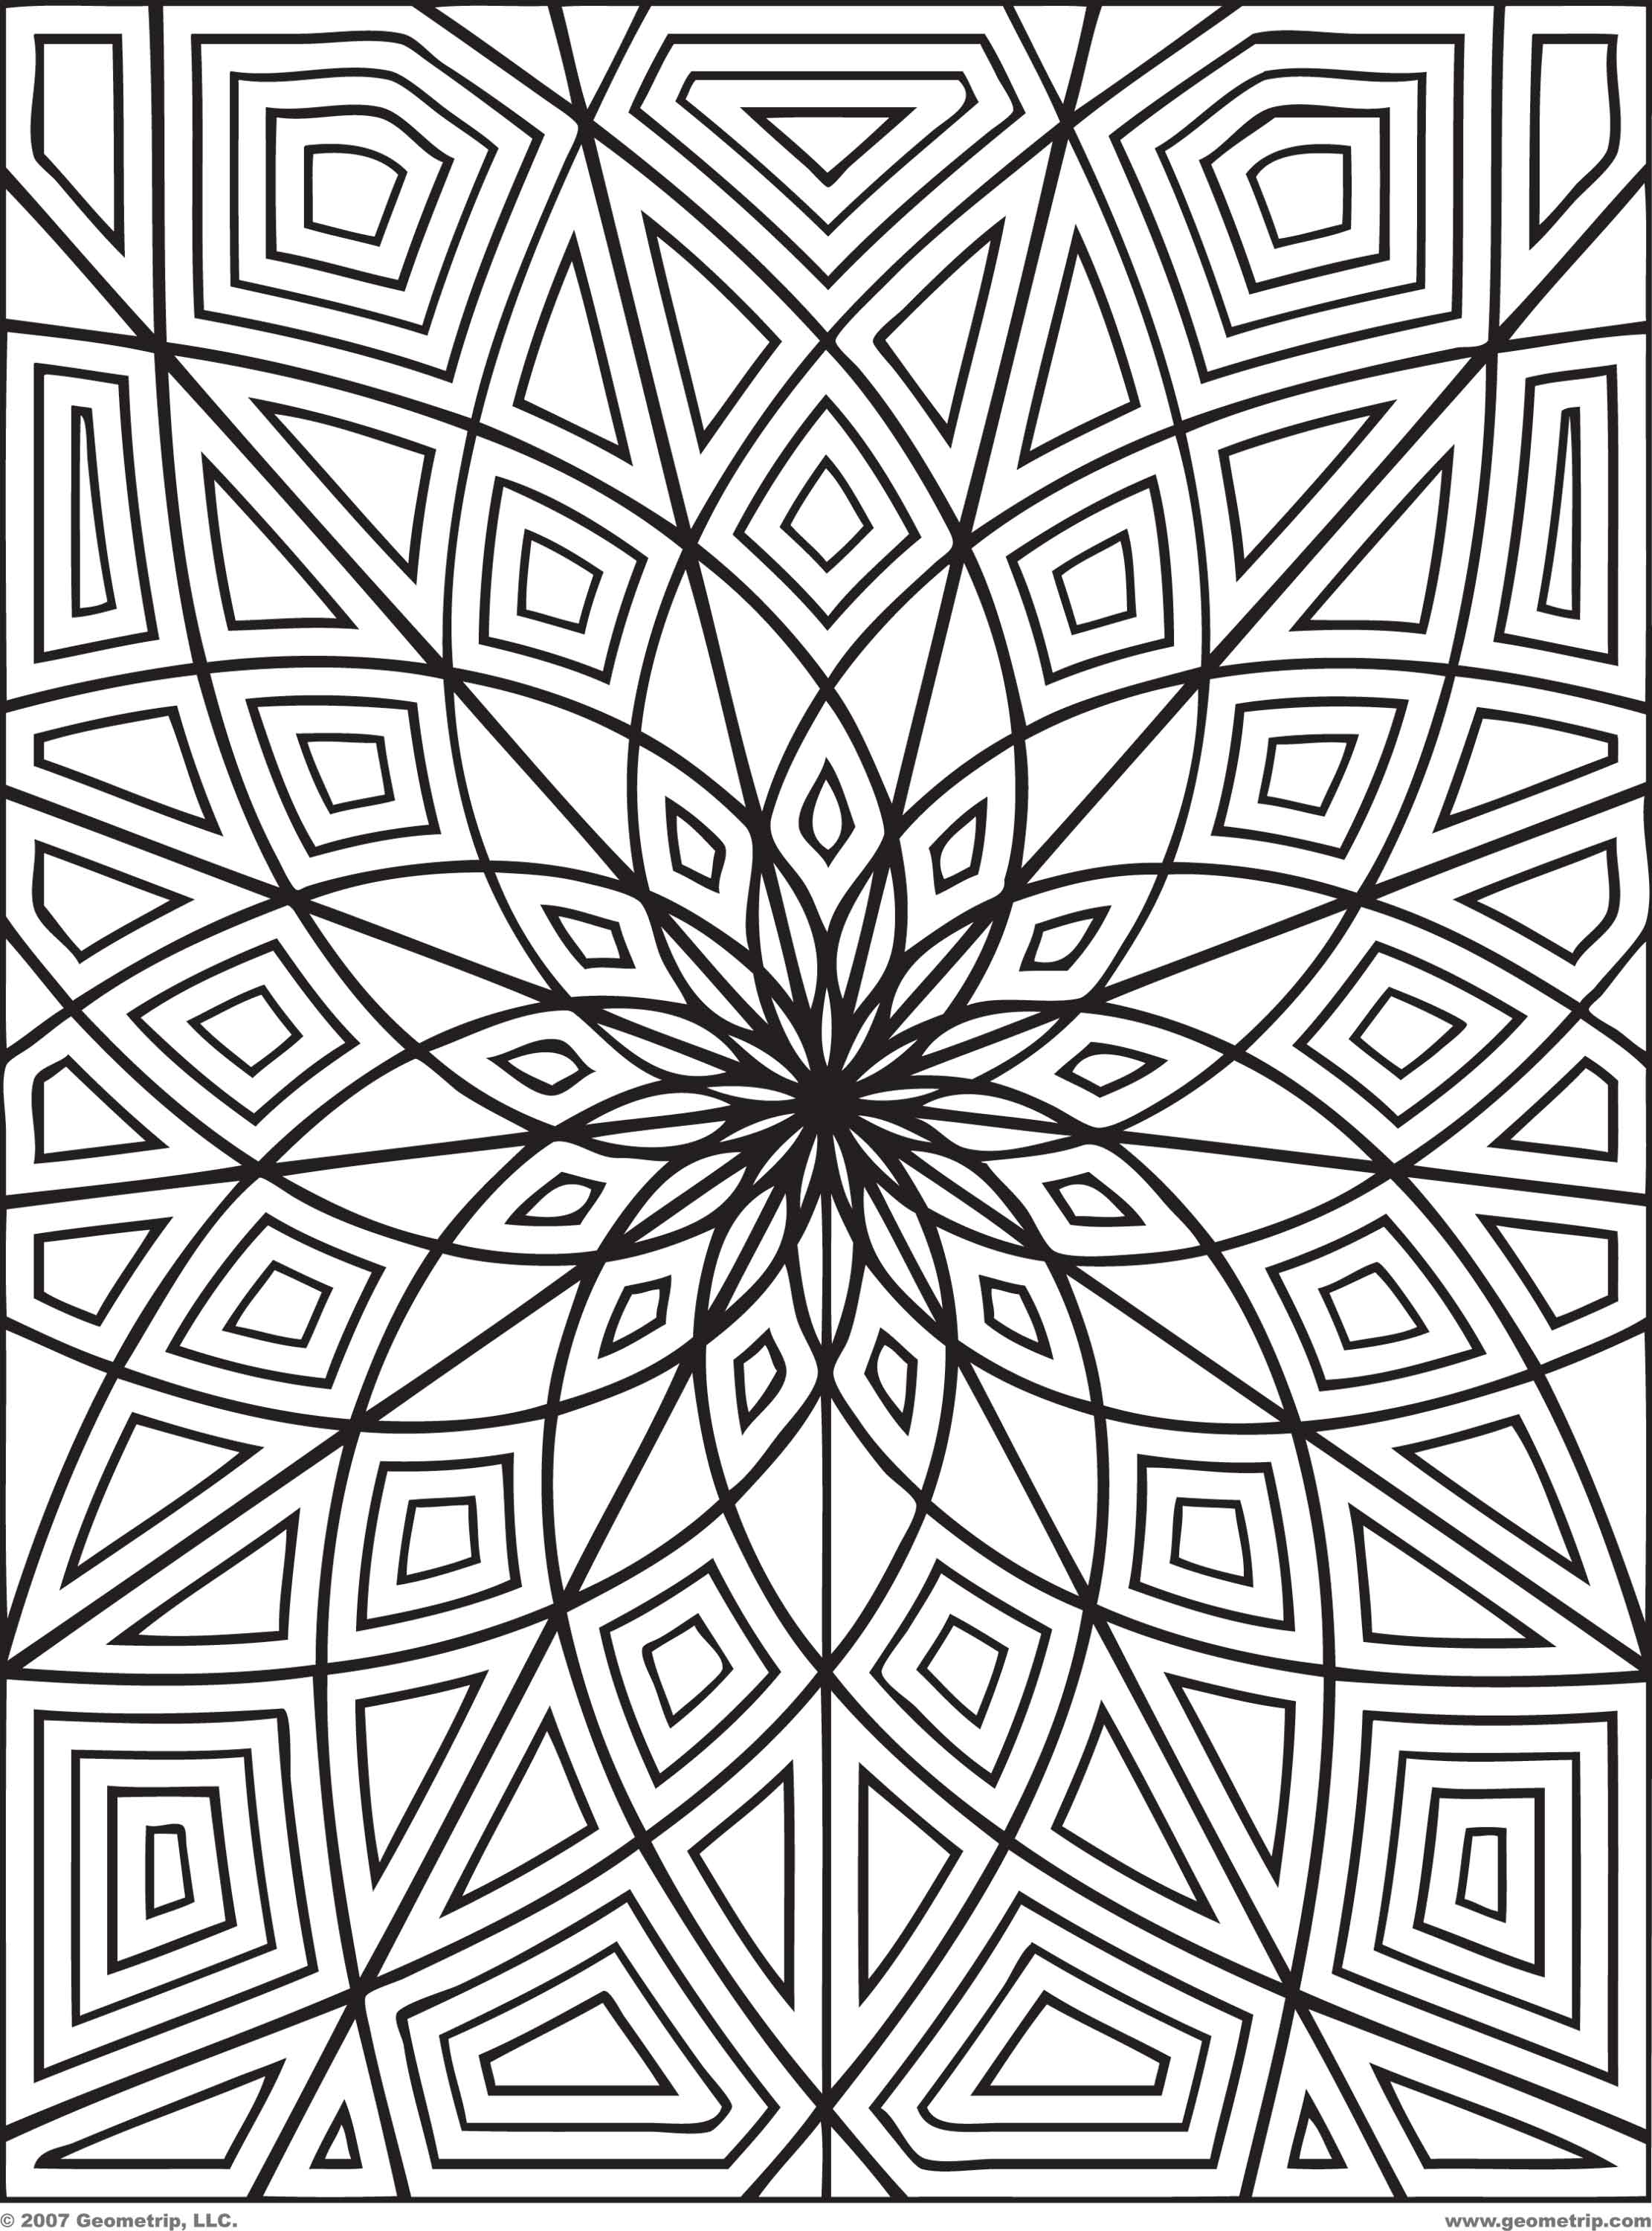 3d Designs Coloring Books Pages For Adults � IMMV VISUALDNSNET